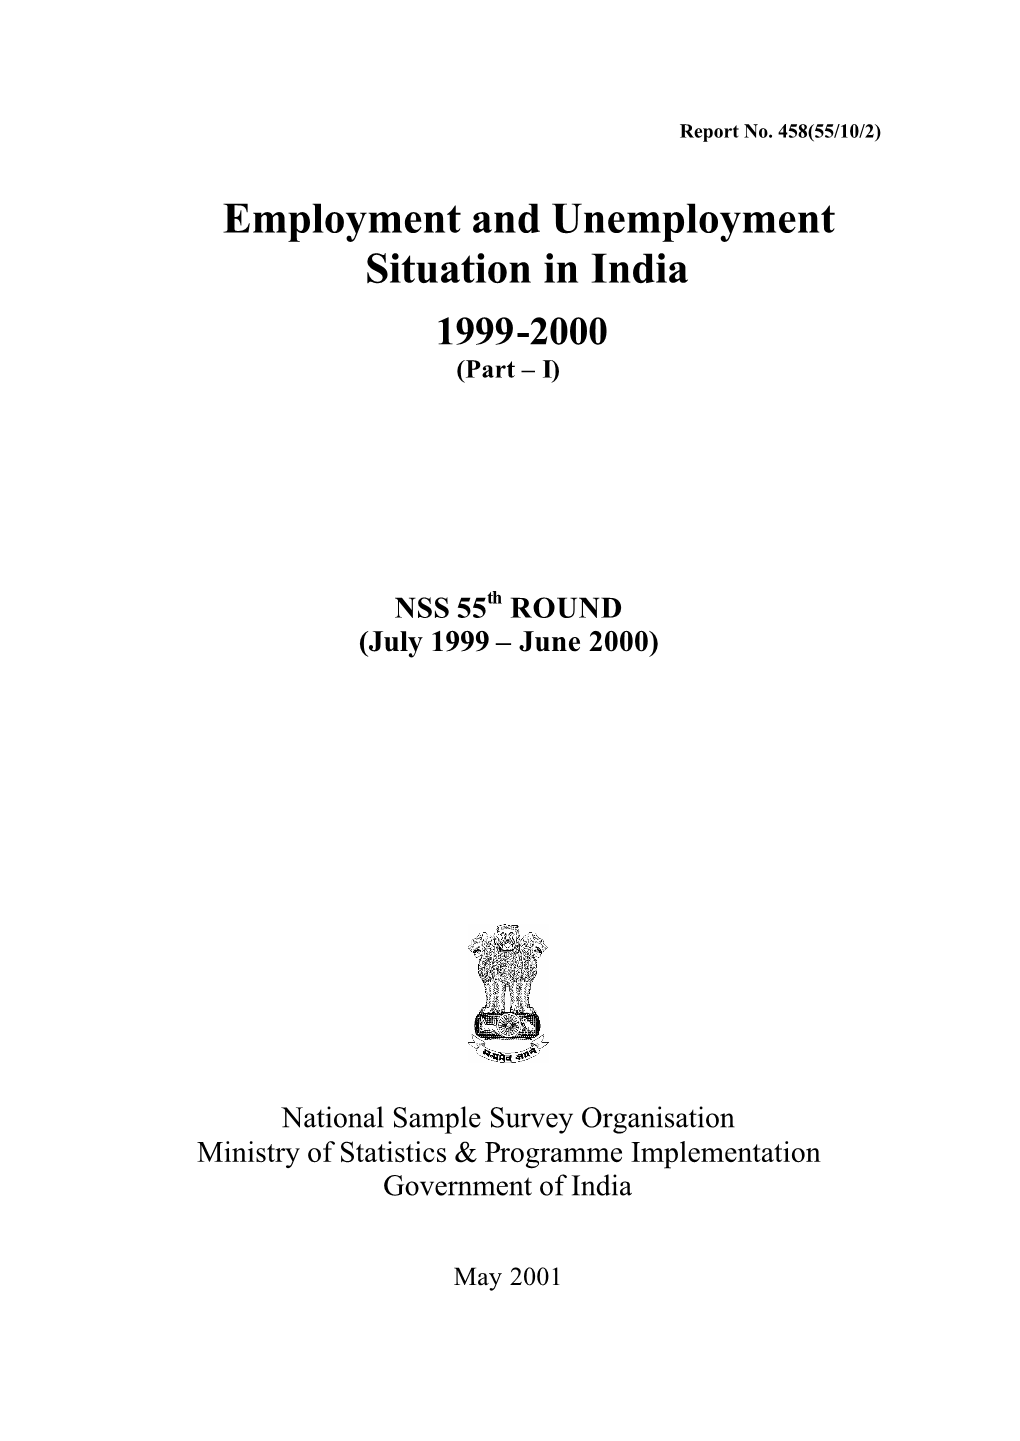 Employment & Unemployment Situation in India, 1999-2000(Part-I)